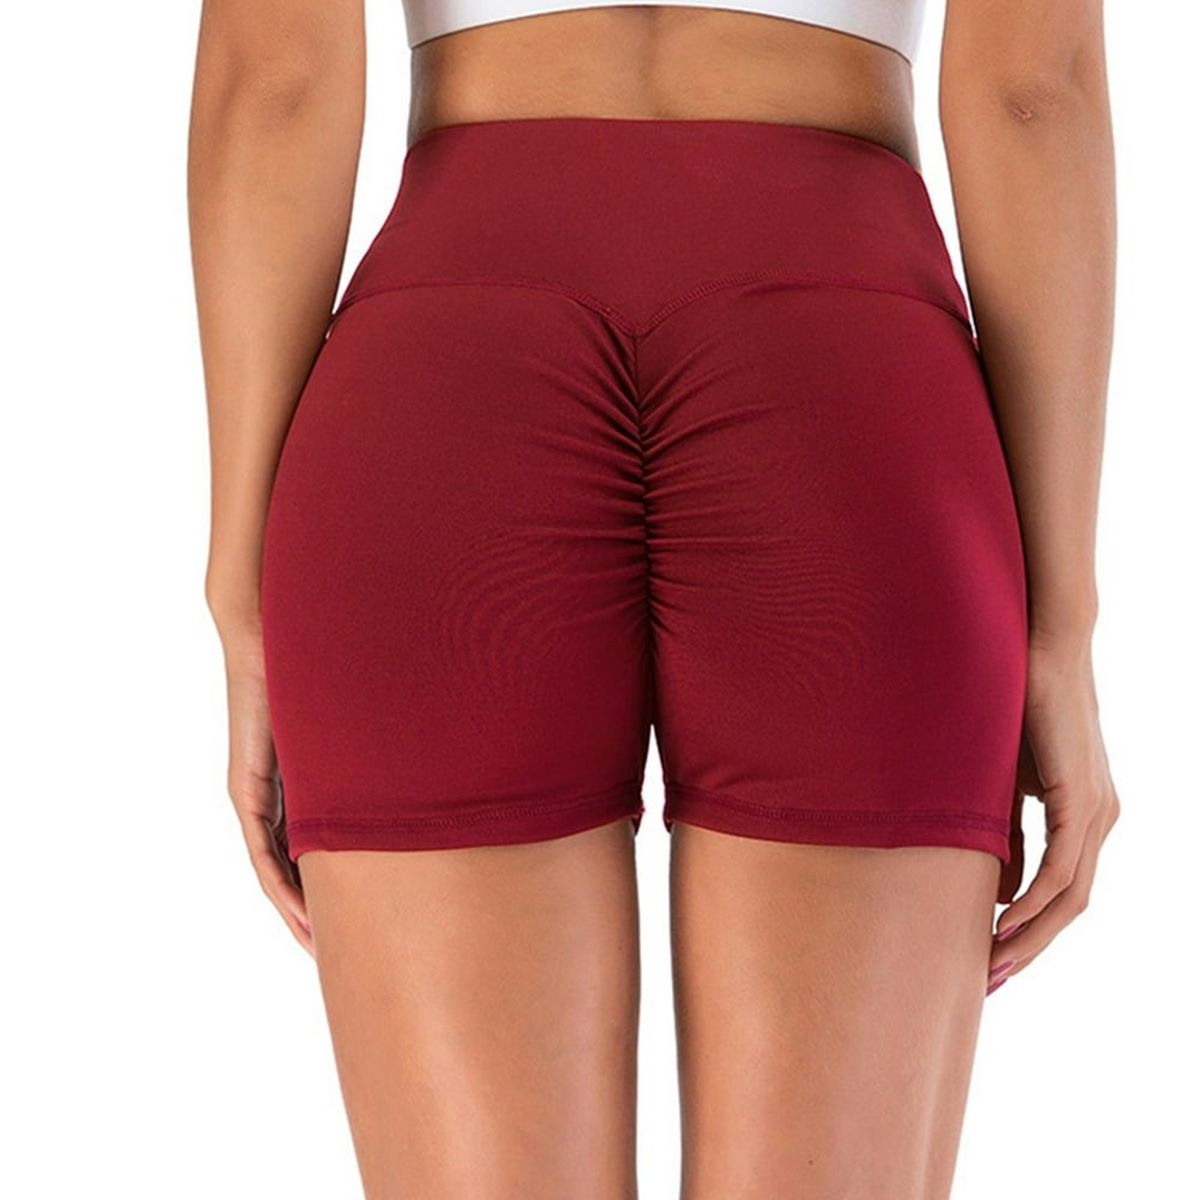 13 Incredible Gym Workout Shorts For 2023